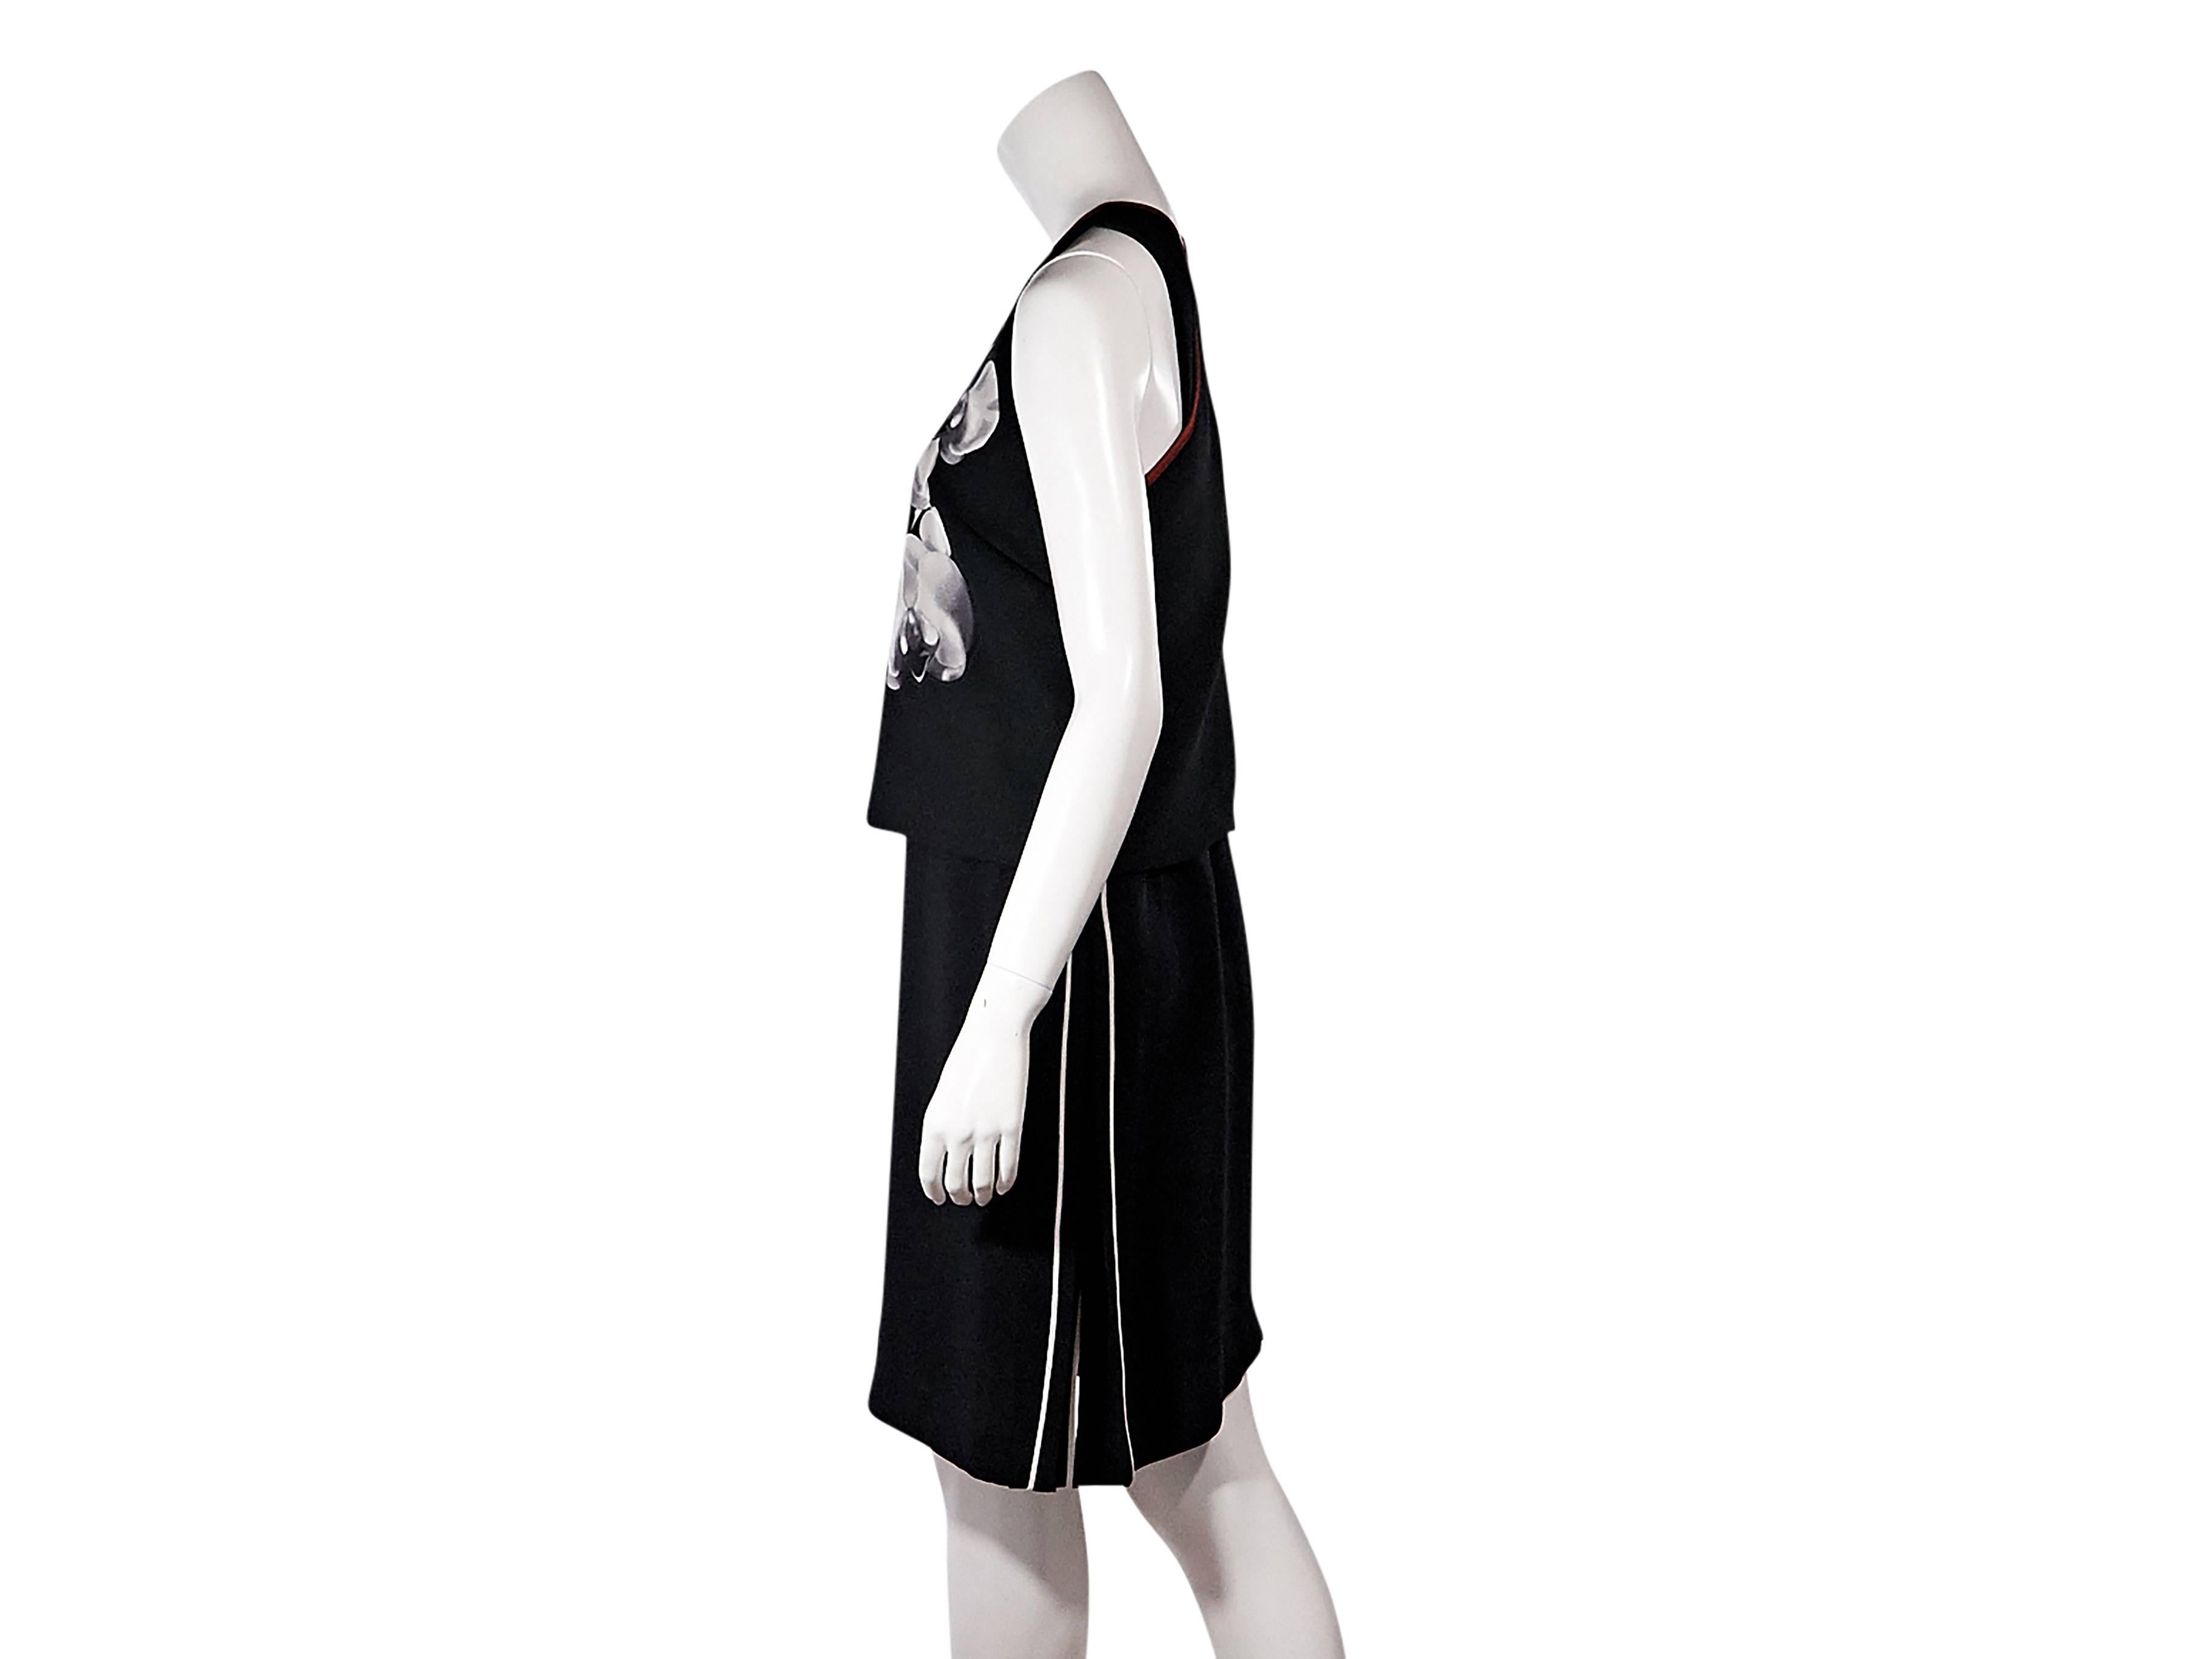 Product details:  Black floral-printed dress by Fendi.  Scoopneck.  Sleeveless.  Front overlay.  Crisscross back.  Size 8
Condition: Pre-owned. Very good.

Est. Retail $ 1,498.00